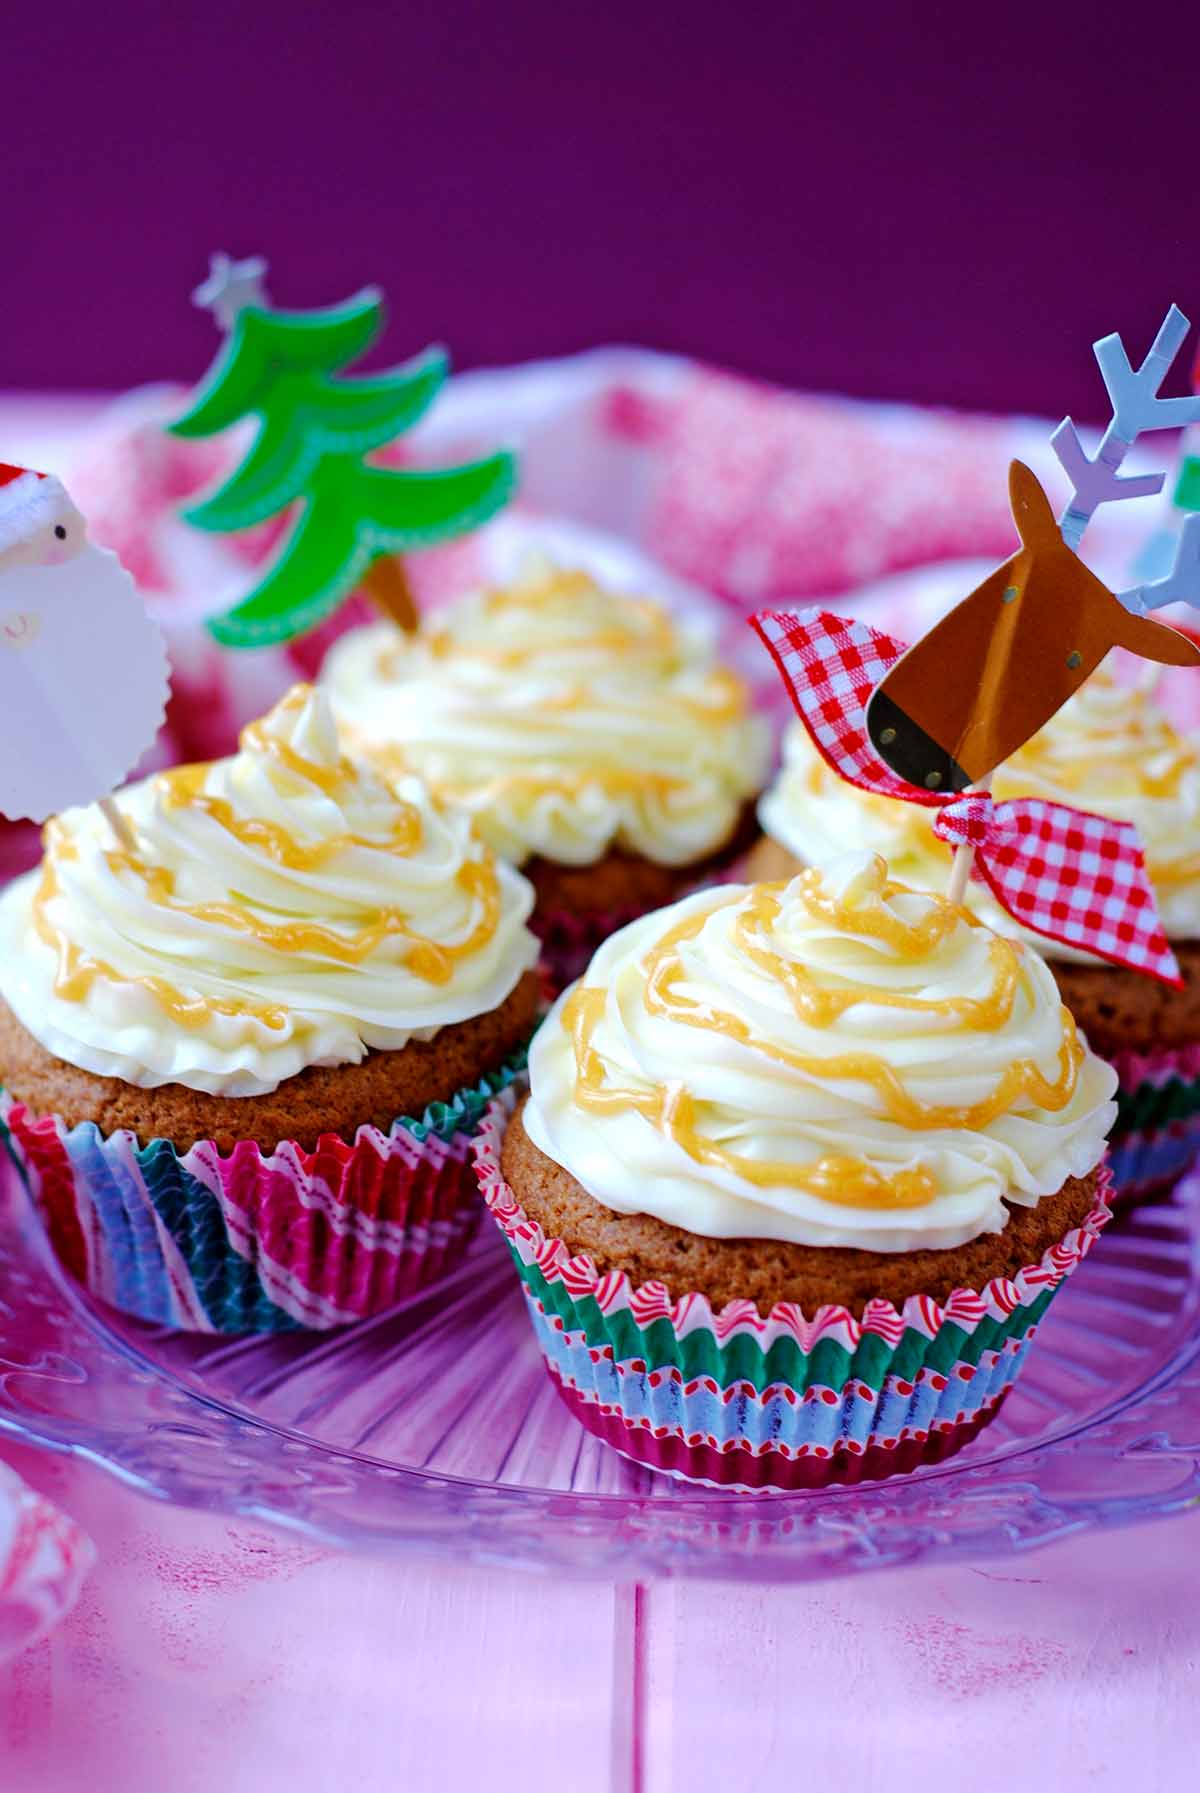 Four cupcakes on a glass plate with Christmas decorations.